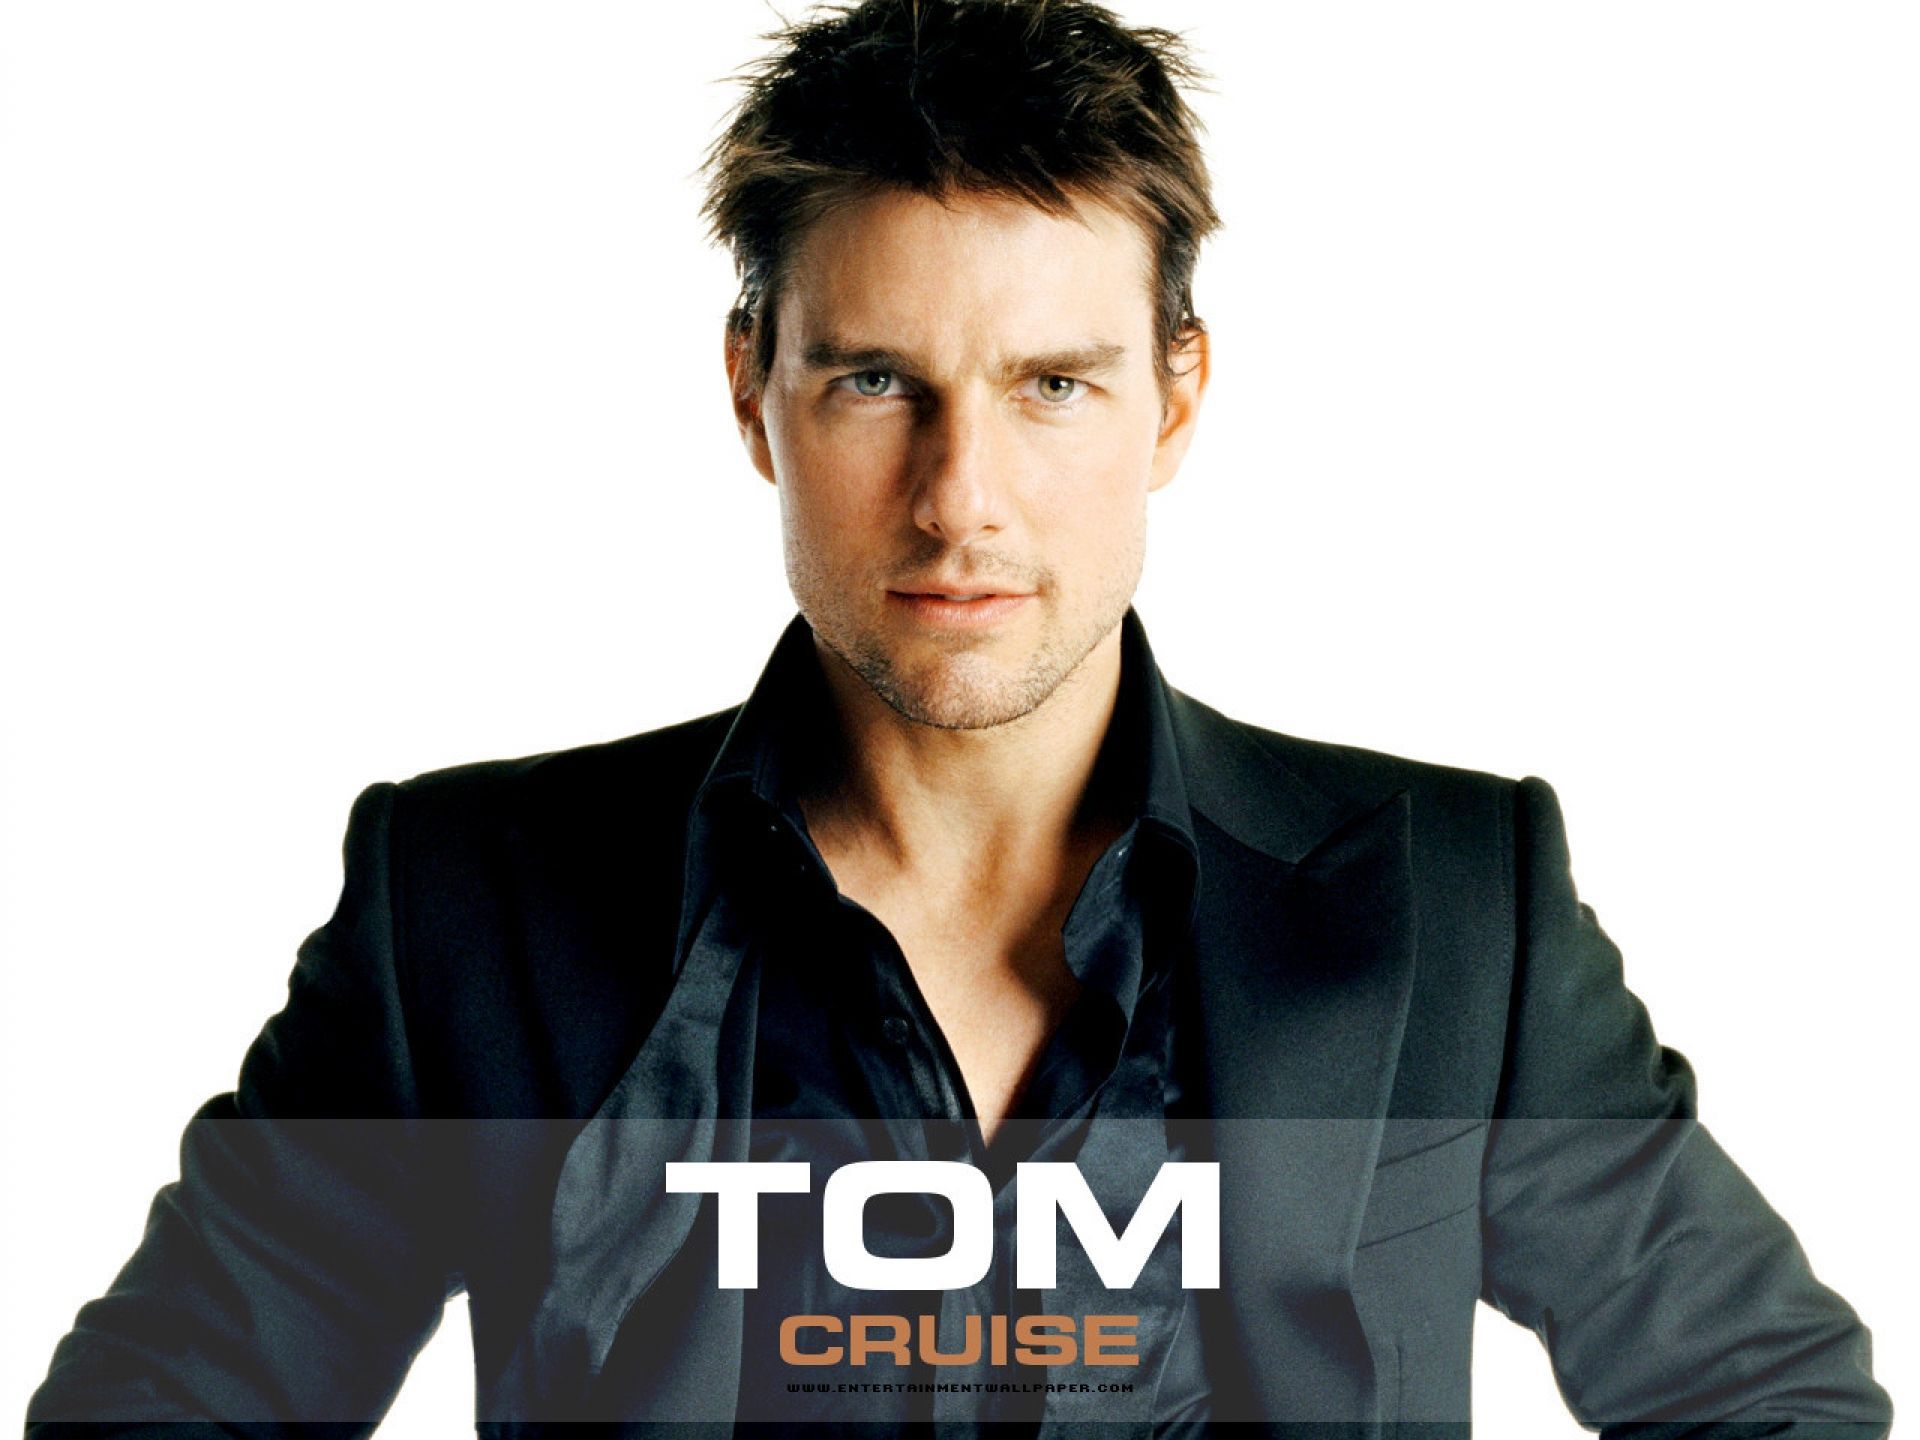 Movie Star Tom Cruise Wallpaper And Image